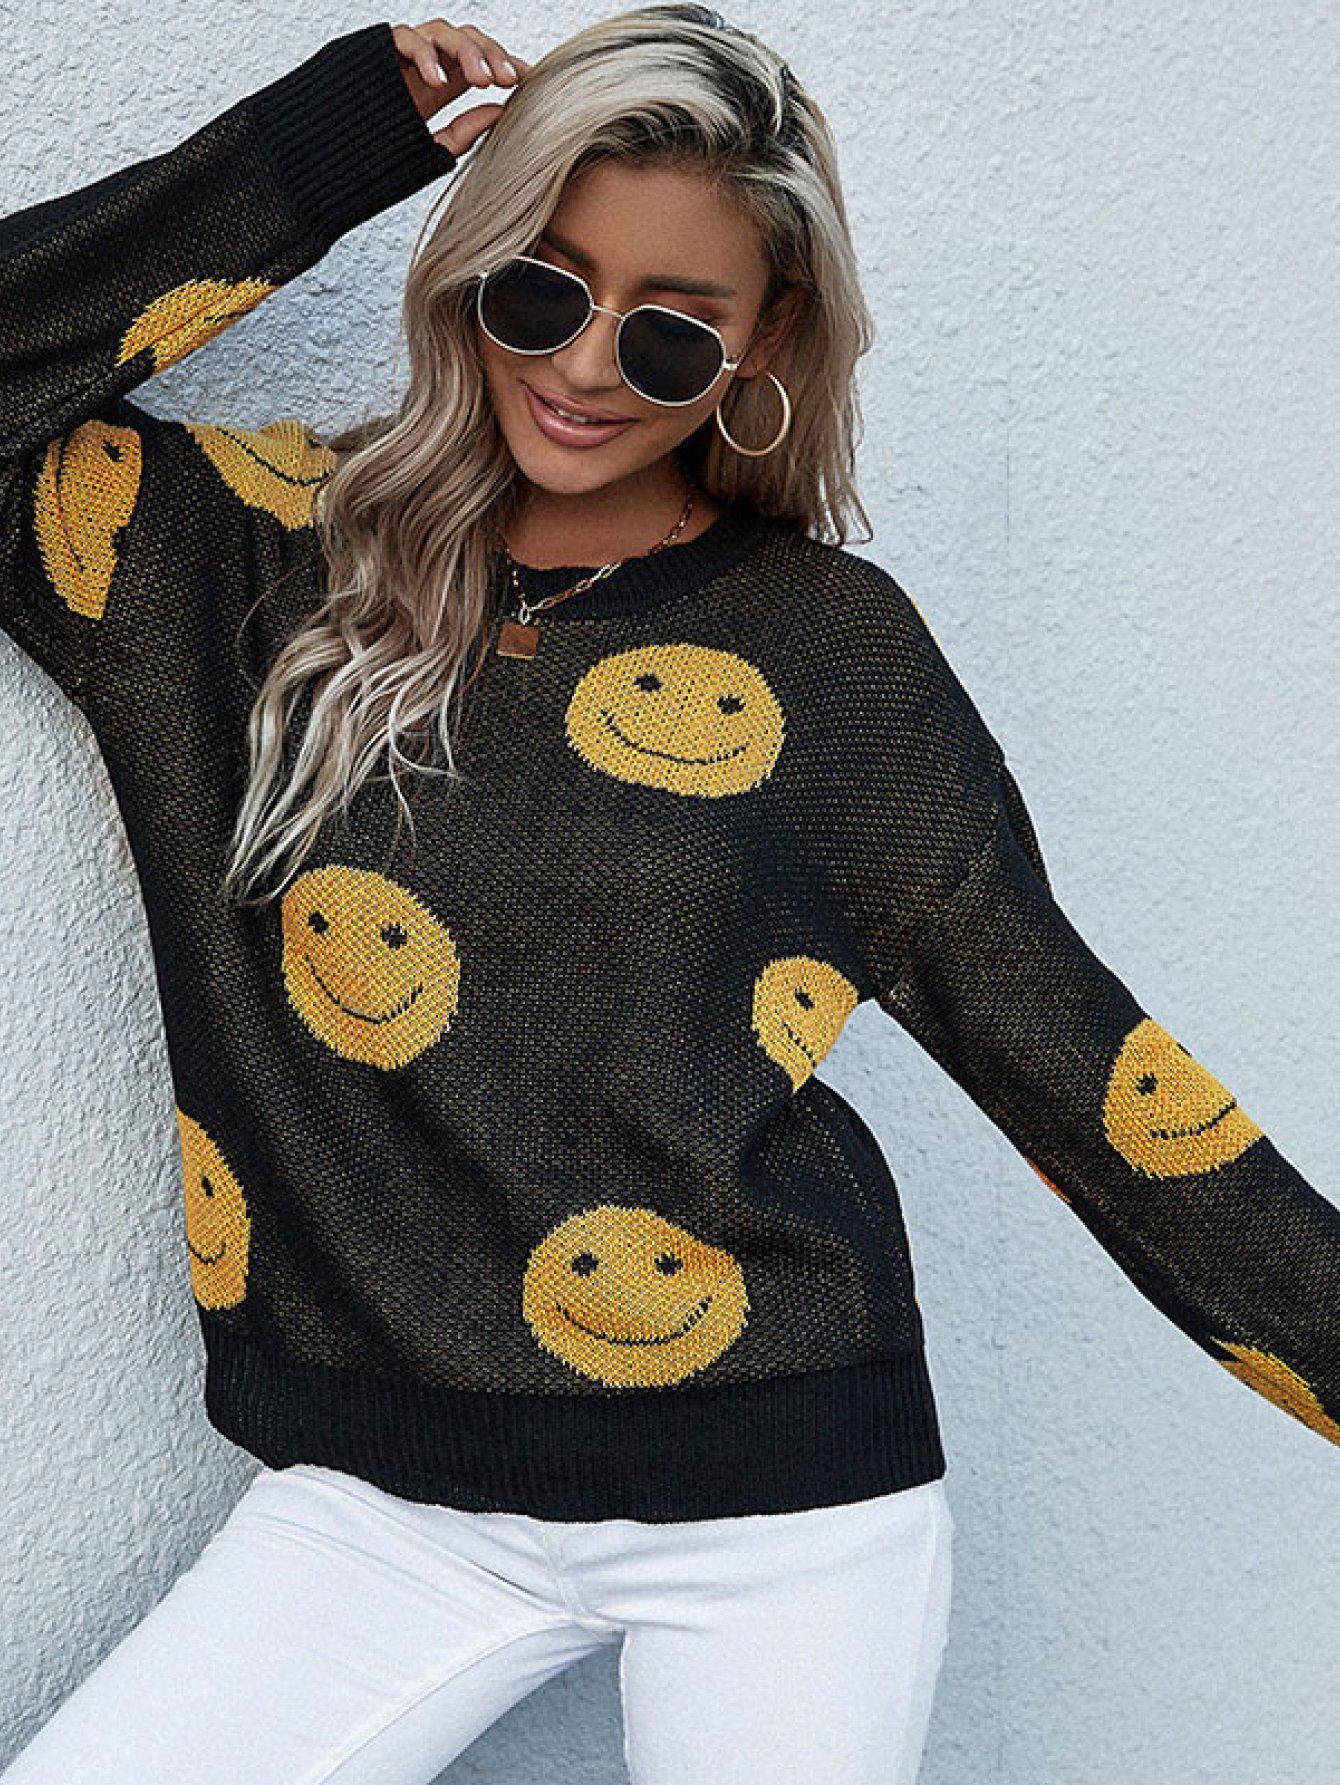 Smiley Face Sweater-TOPS / DRESSES-[Adult]-[Female]-Black-S-Blue Zone Planet